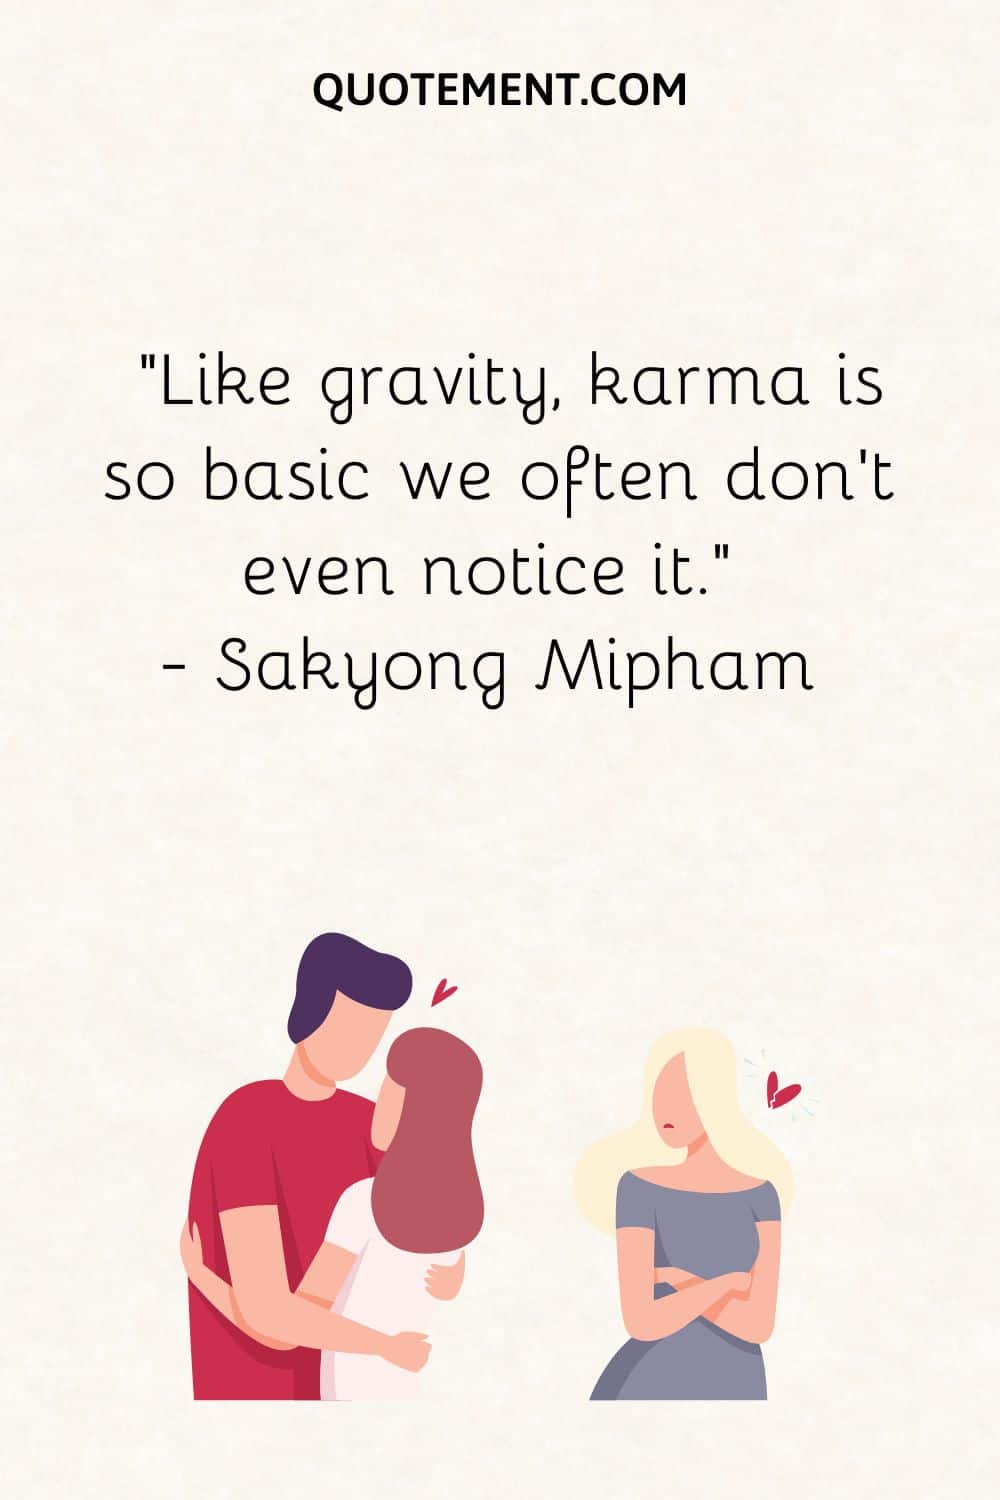 Like gravity, karma is so basic we often don’t even notice it